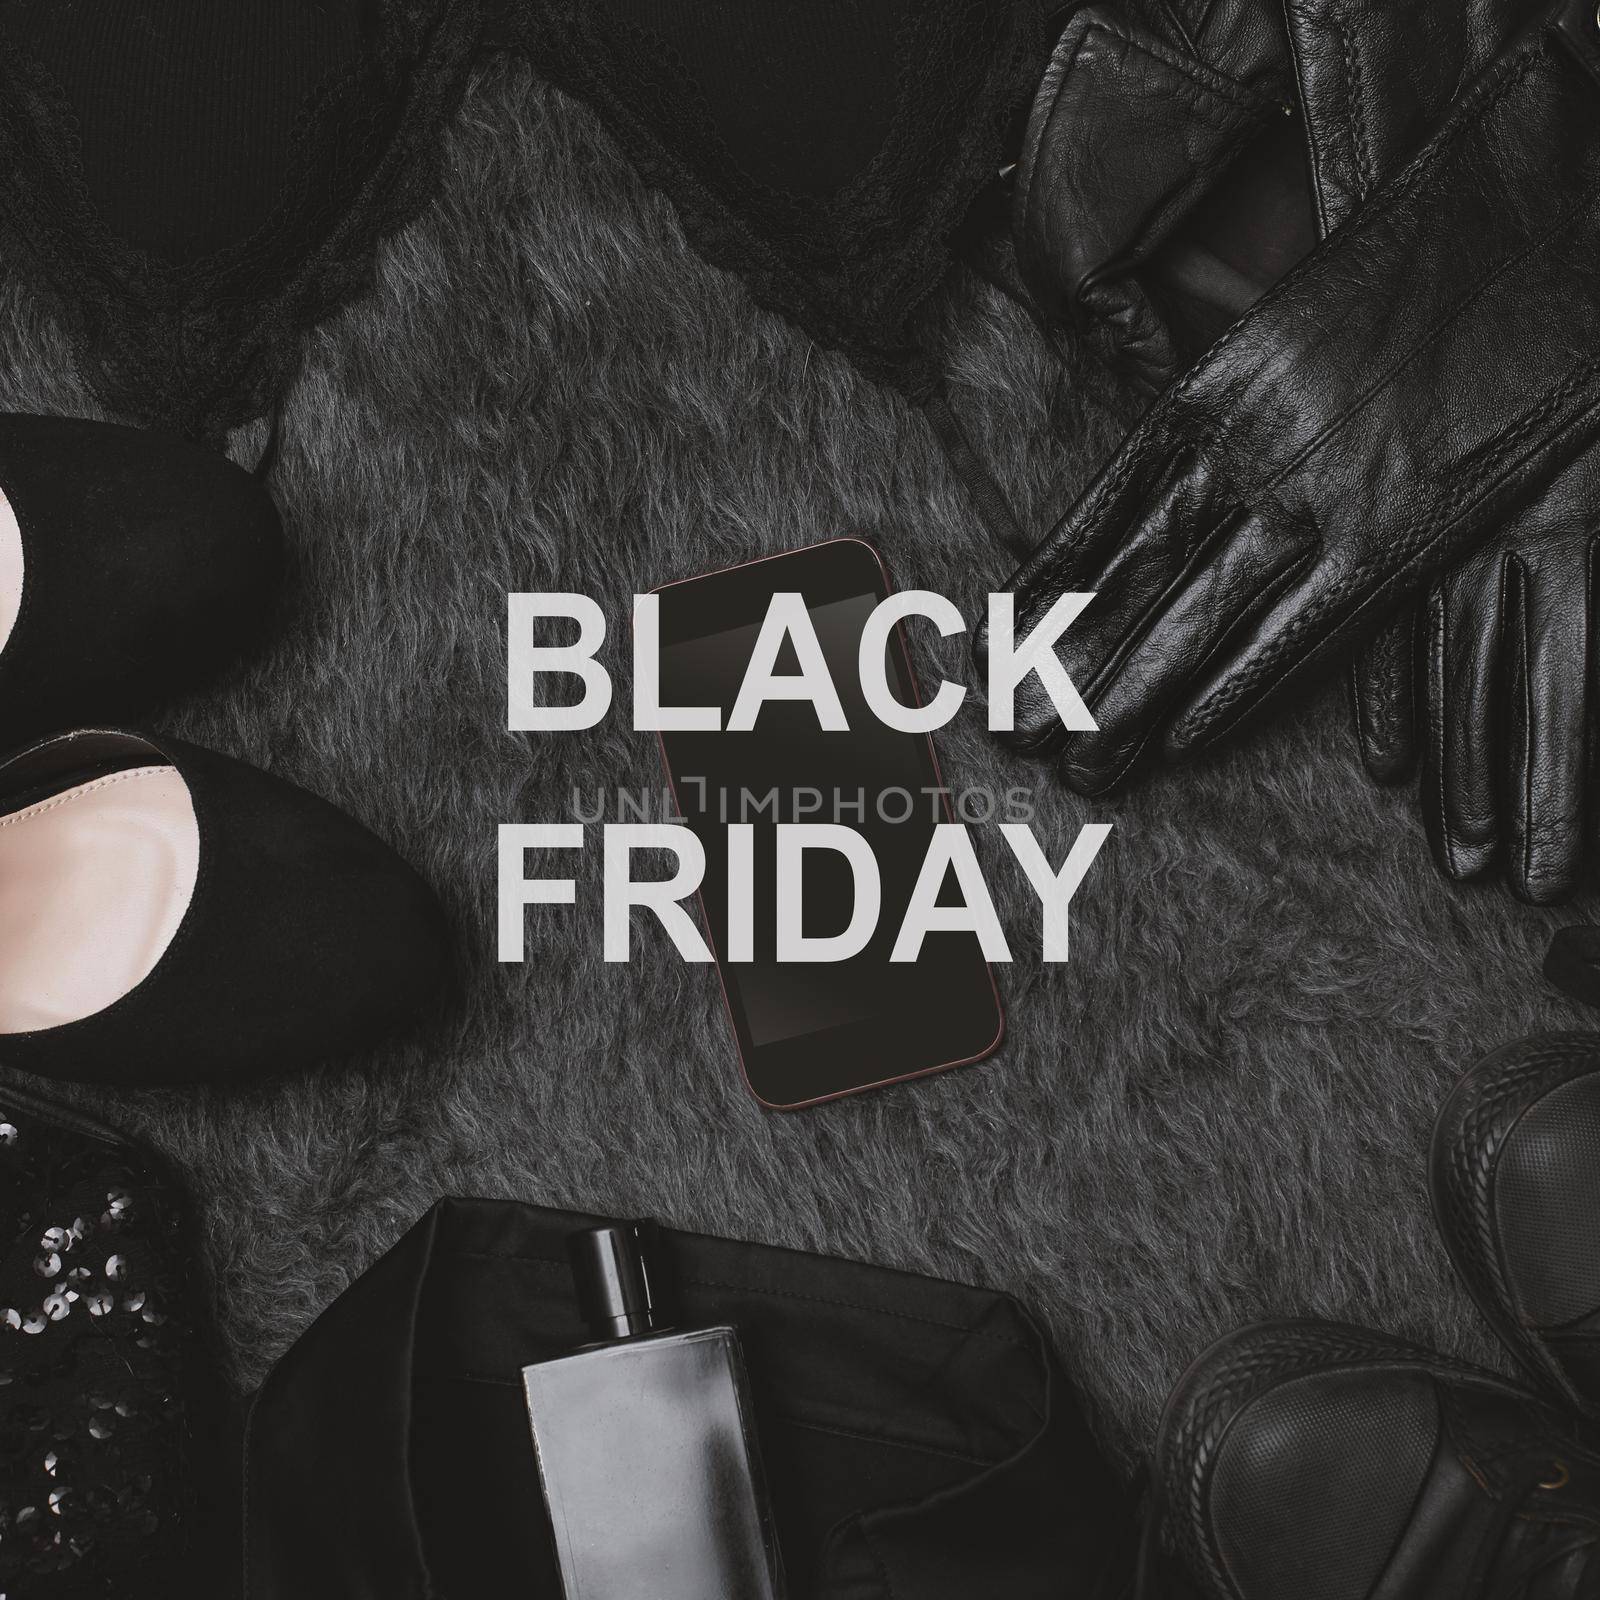 Black Friday Sale Fashion Background. Clothes Flat Lay with Shoes, Fragrance, Lingerie and Phone. Offer Shop Concept by MarinaFrost